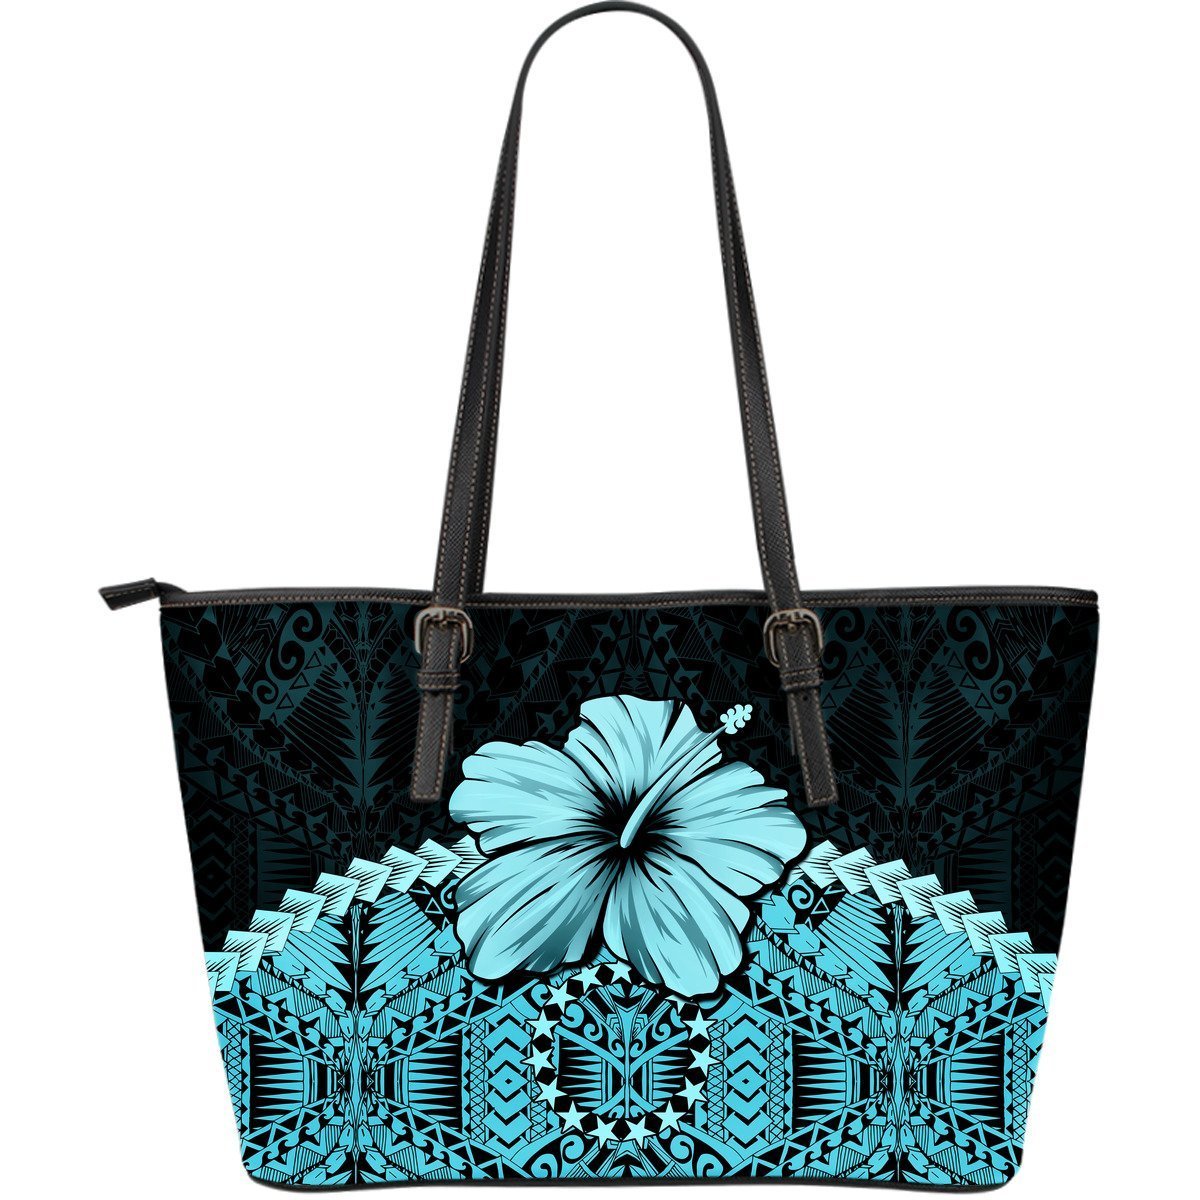 Cook Islands Leather Tote Bag - Hibiscus (Turquoise) Turquoise - Polynesian Pride